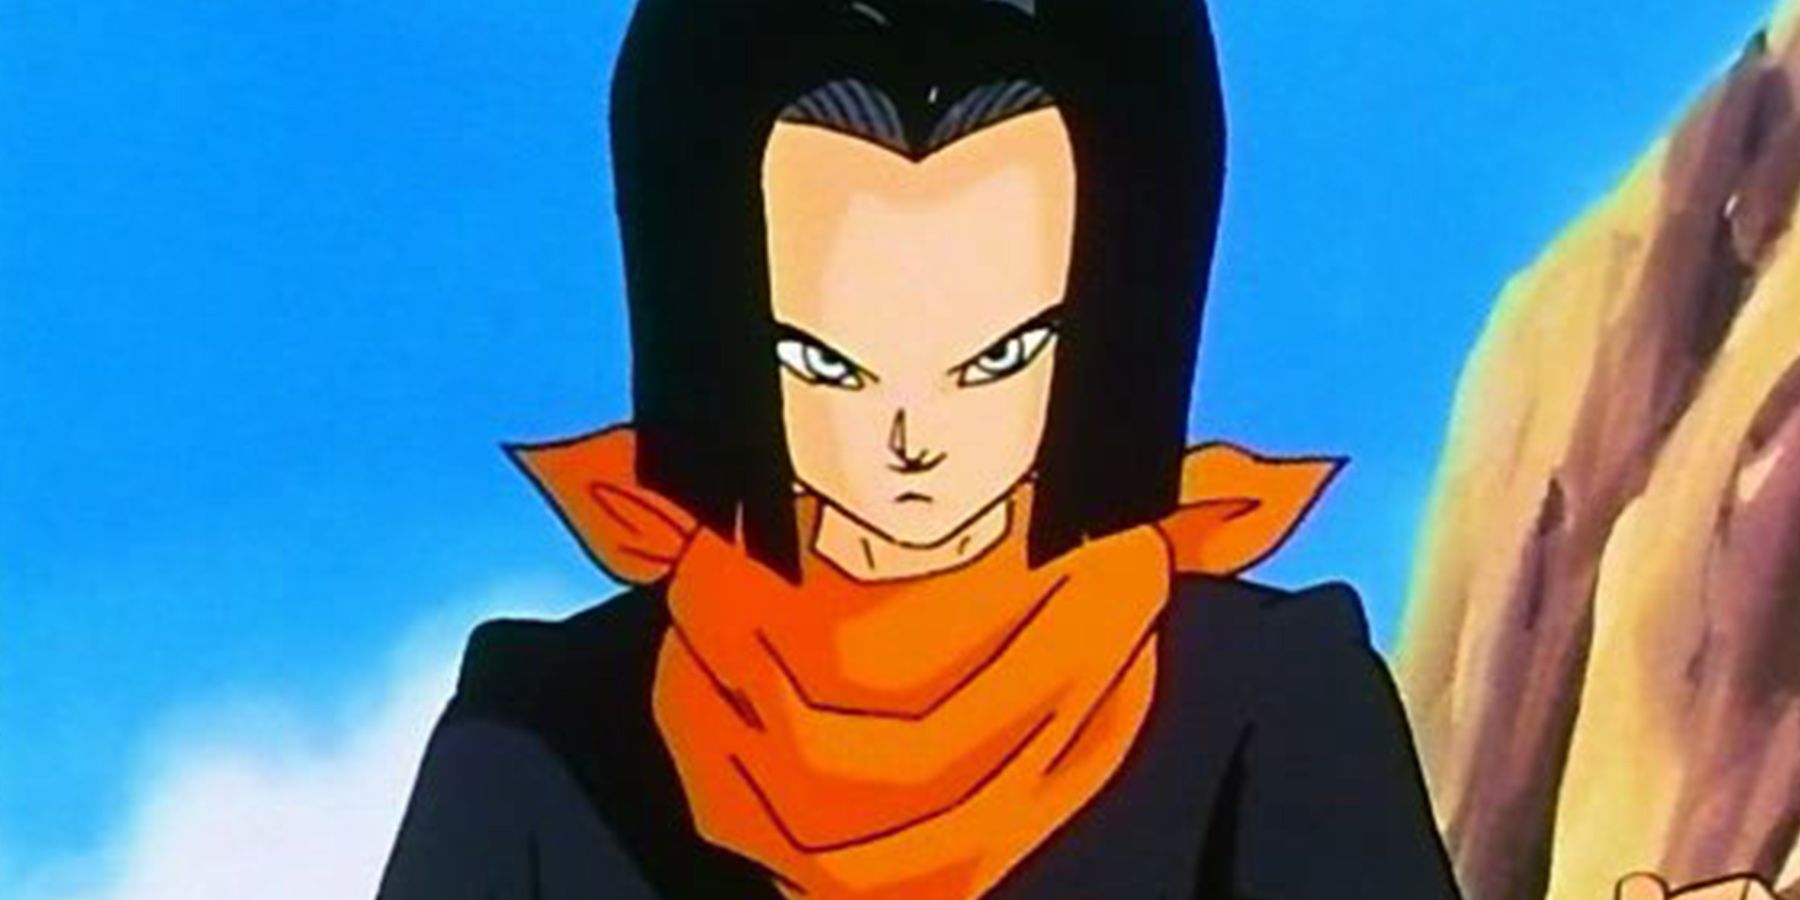 Android 17 in Dragon Ball.